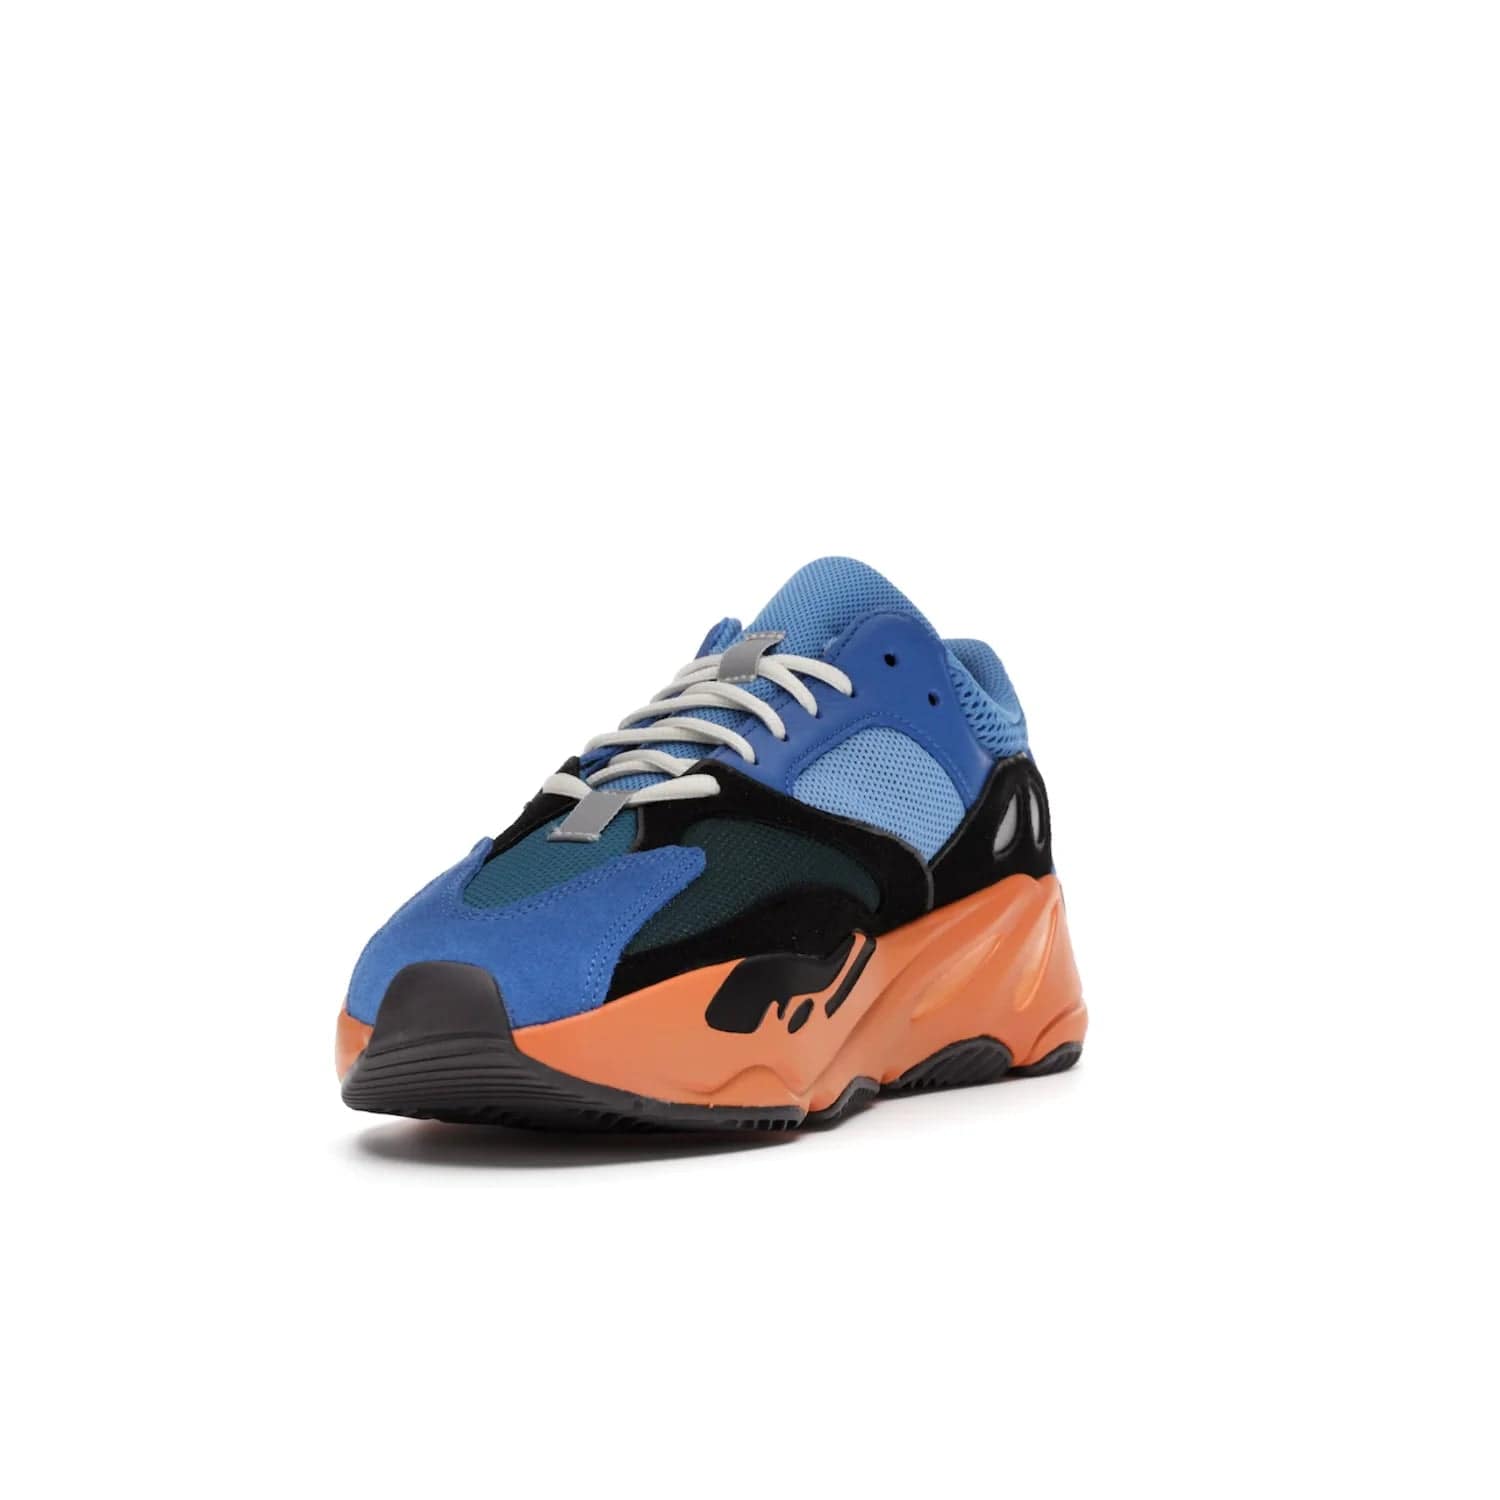 adidas Yeezy Boost 700 Bright Blue - Image 13 - Only at www.BallersClubKickz.com - Iconic sneaker style meets vibrant colour with the adidas Yeezy Boost 700 Bright Blue. Reflective accents, turquoise and teal panels, bright orange midsole and black outsole make for a bold release. April 2021.